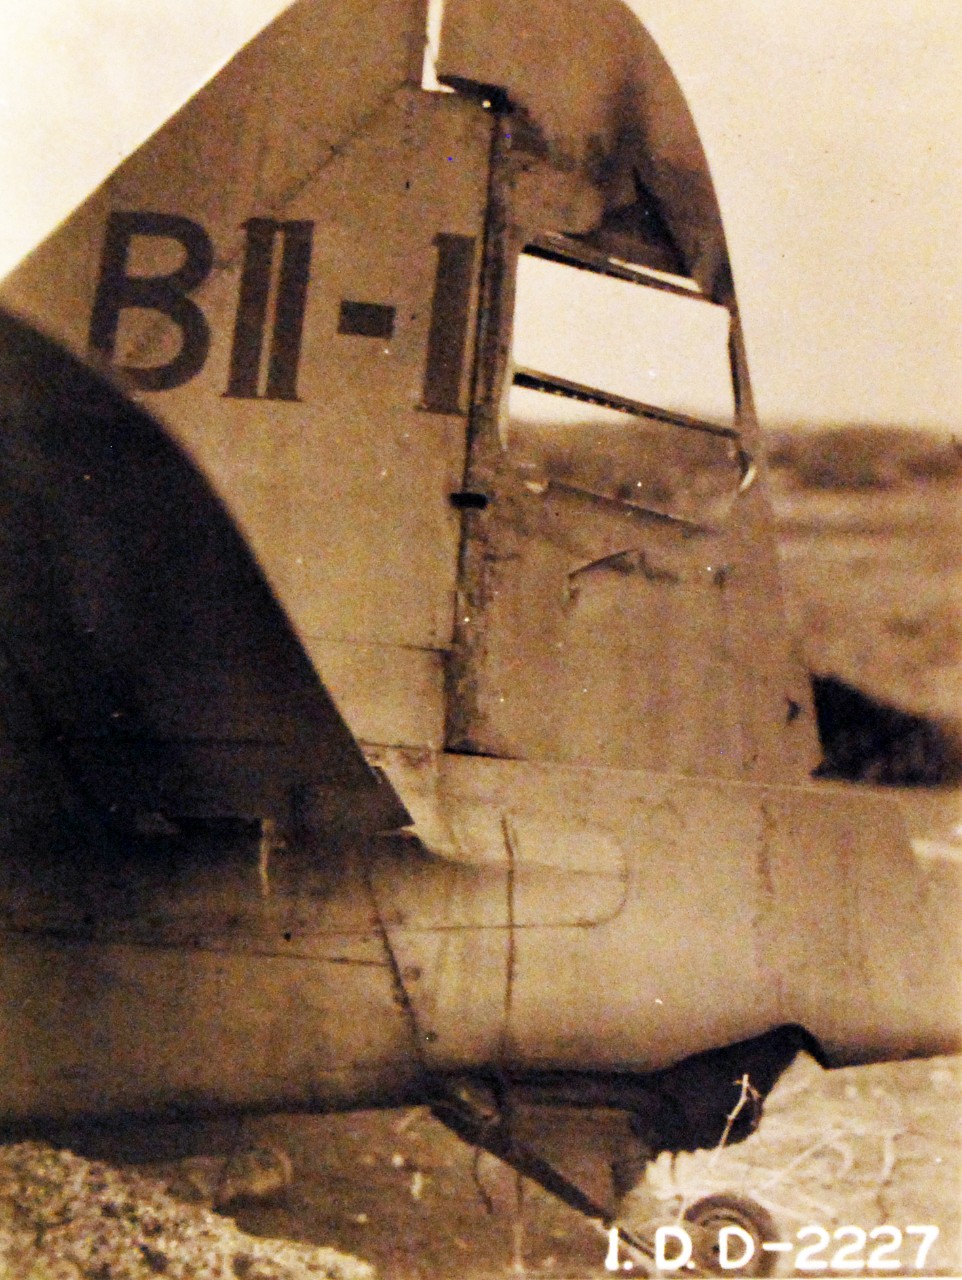 80-G-22160:   Japanese Attack on Pearl Harbor, December 7, 1941.   Crash of Japanese A6M2, B11-120, from Japanese carrier, Hiryu,at Niihau Island site.  Note tail section from the wrecked Zero.  Photograph released probably 1942.  Official U.S. Navy photograph, now in the collections of the National Archives.  (2016/09/20).